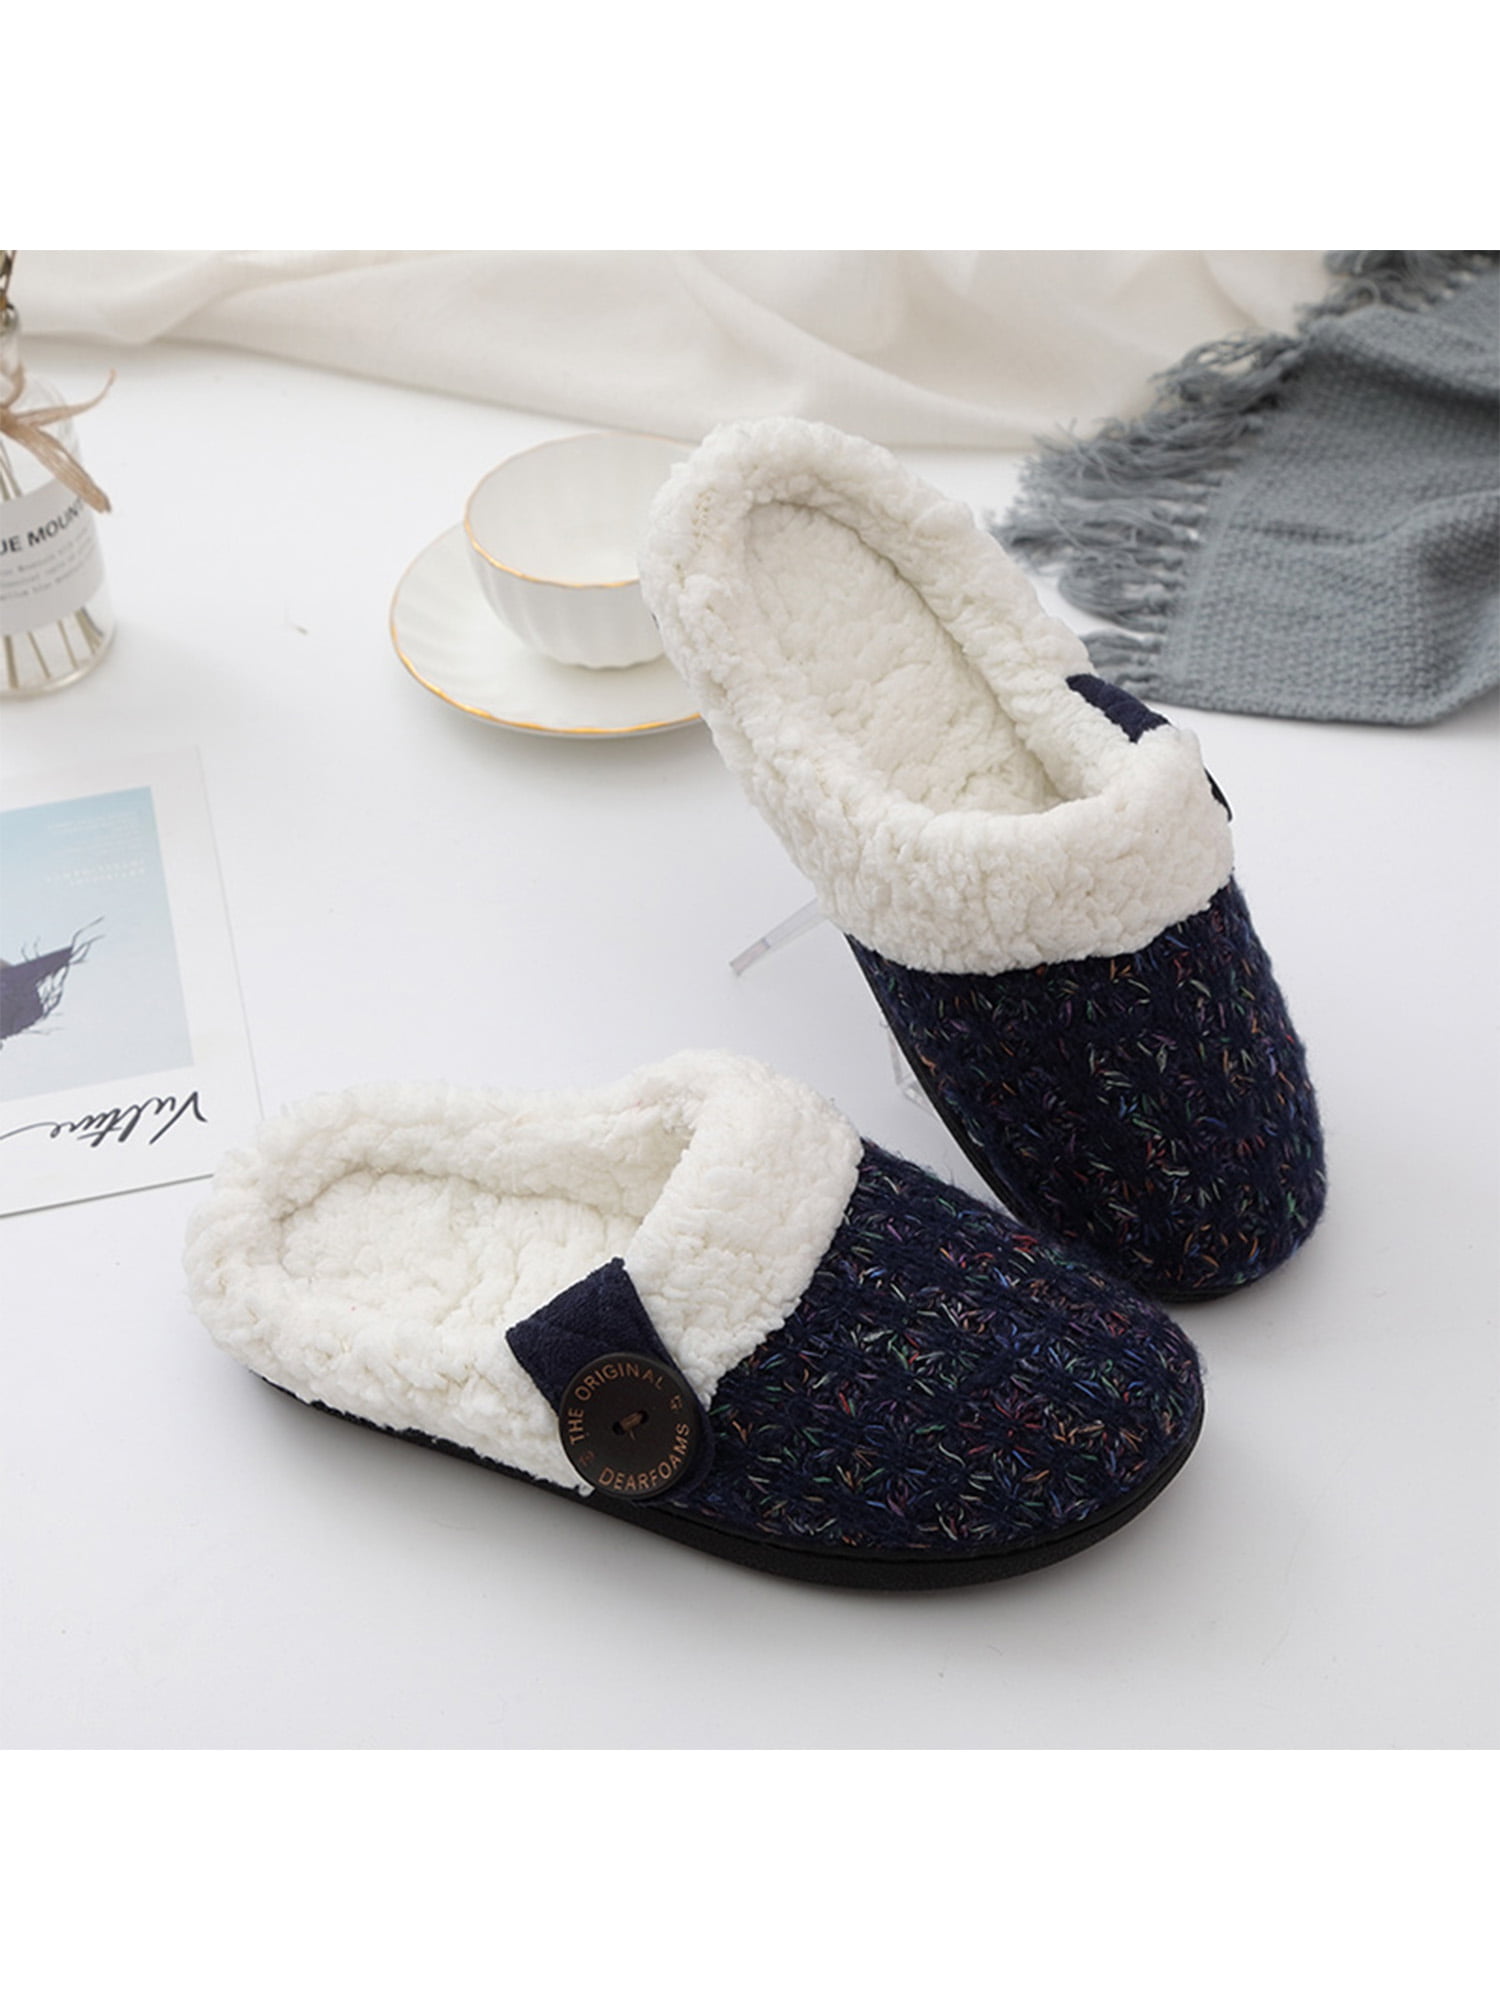 Slippers Slip On Ex Store Tu Fluffy Warm Winter Fleece Lined Backless New Ladies 